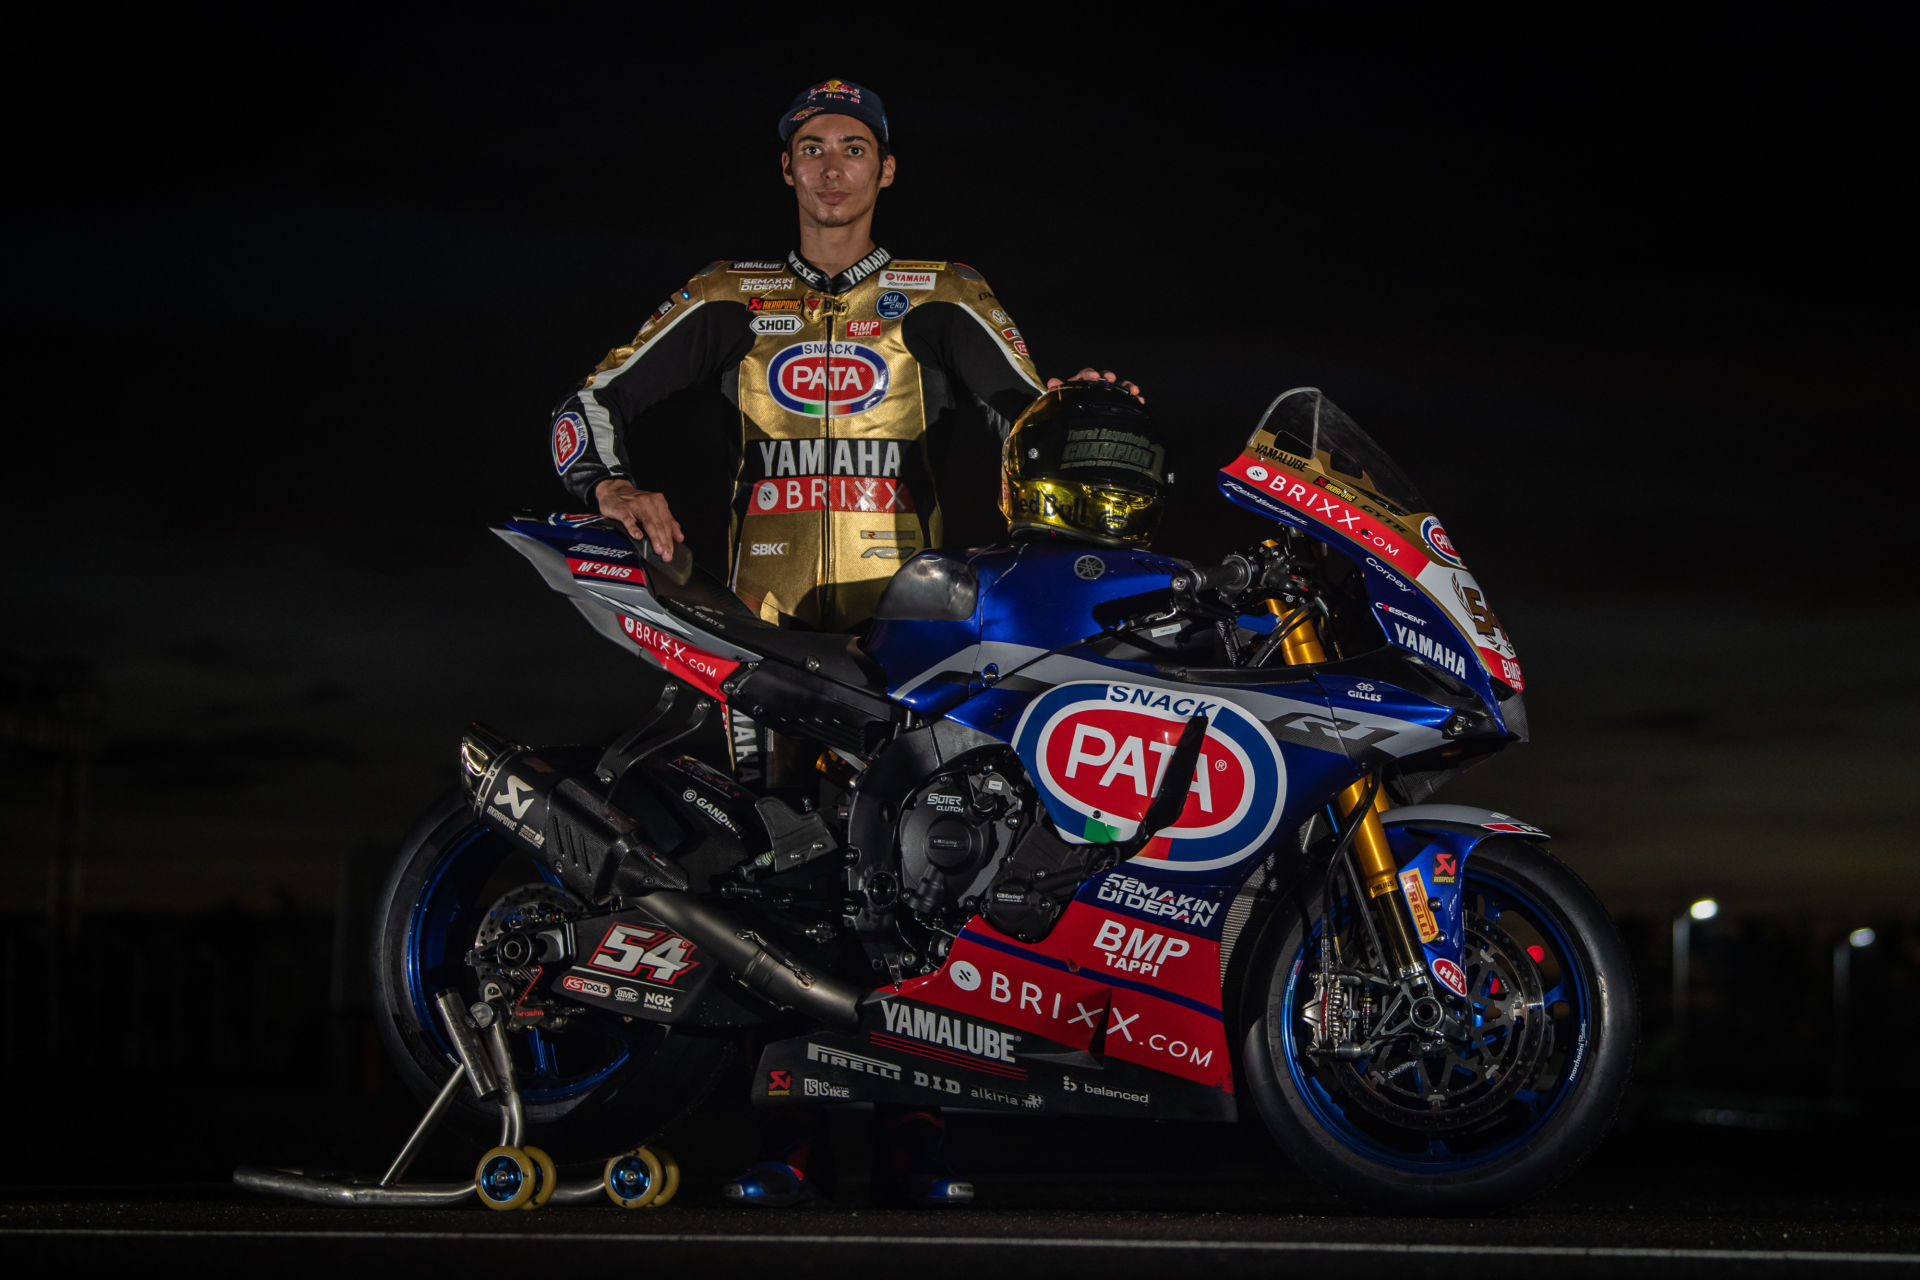 While fighting for the 2021 Superbike World Championship, Toprak Razgatlioglu says he just focused on each individual race. “Every race, I look at the win,” he says. Photo courtesy Yamaha.